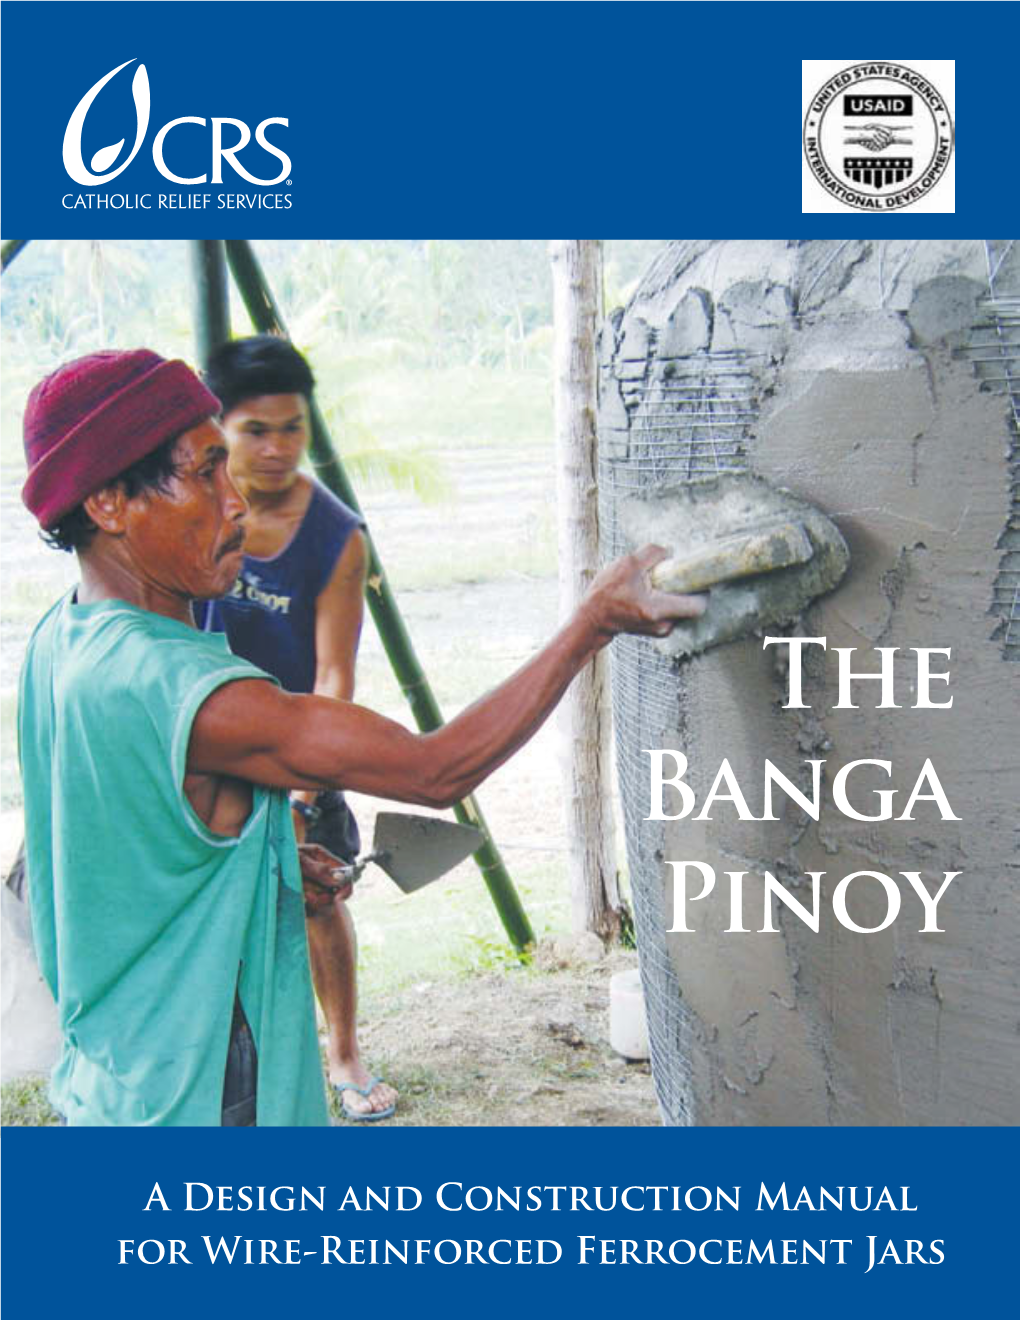 The Banga Pinoy: a Design and Construction Manual for Wire-Reinforced Ferrocement Jars by Catholic Relief Services Iv